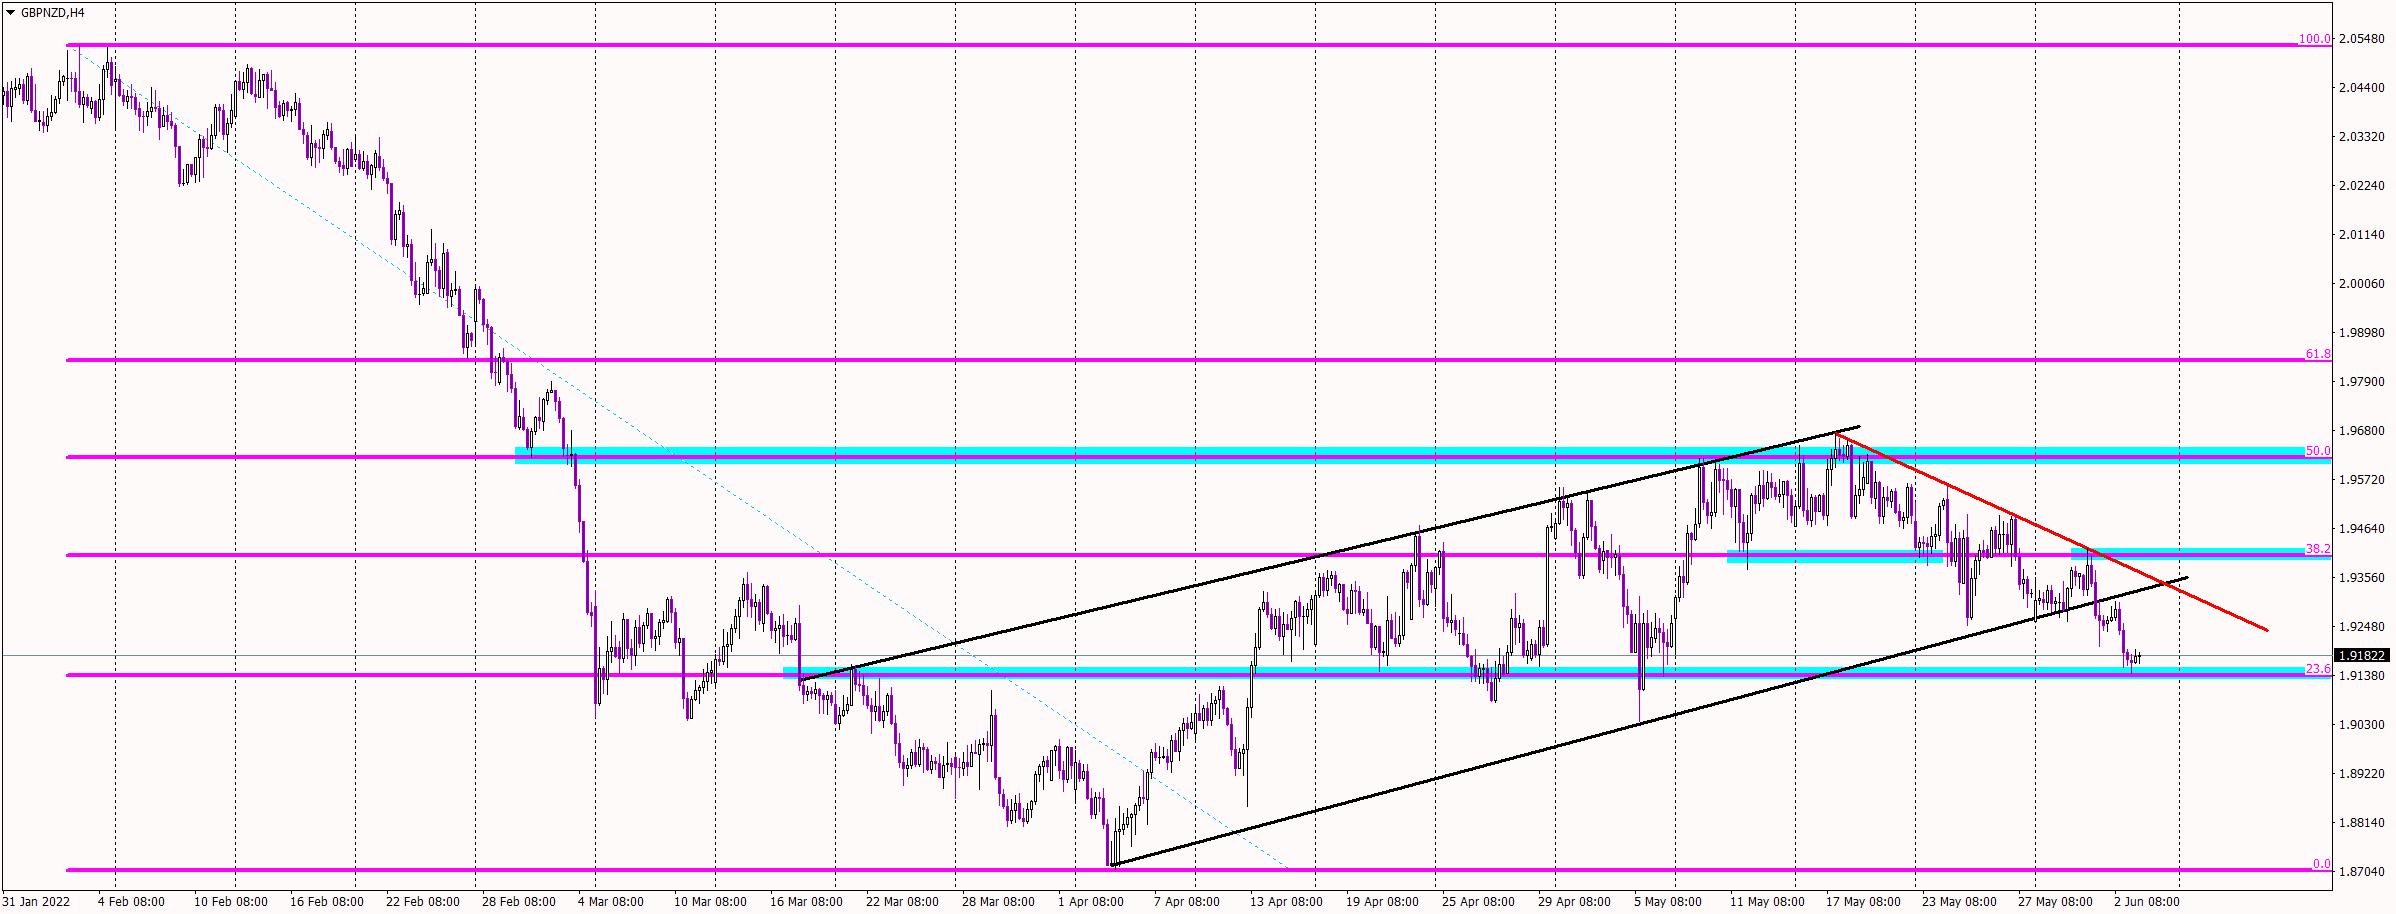 GBP/NZD comes back to the bearish trend